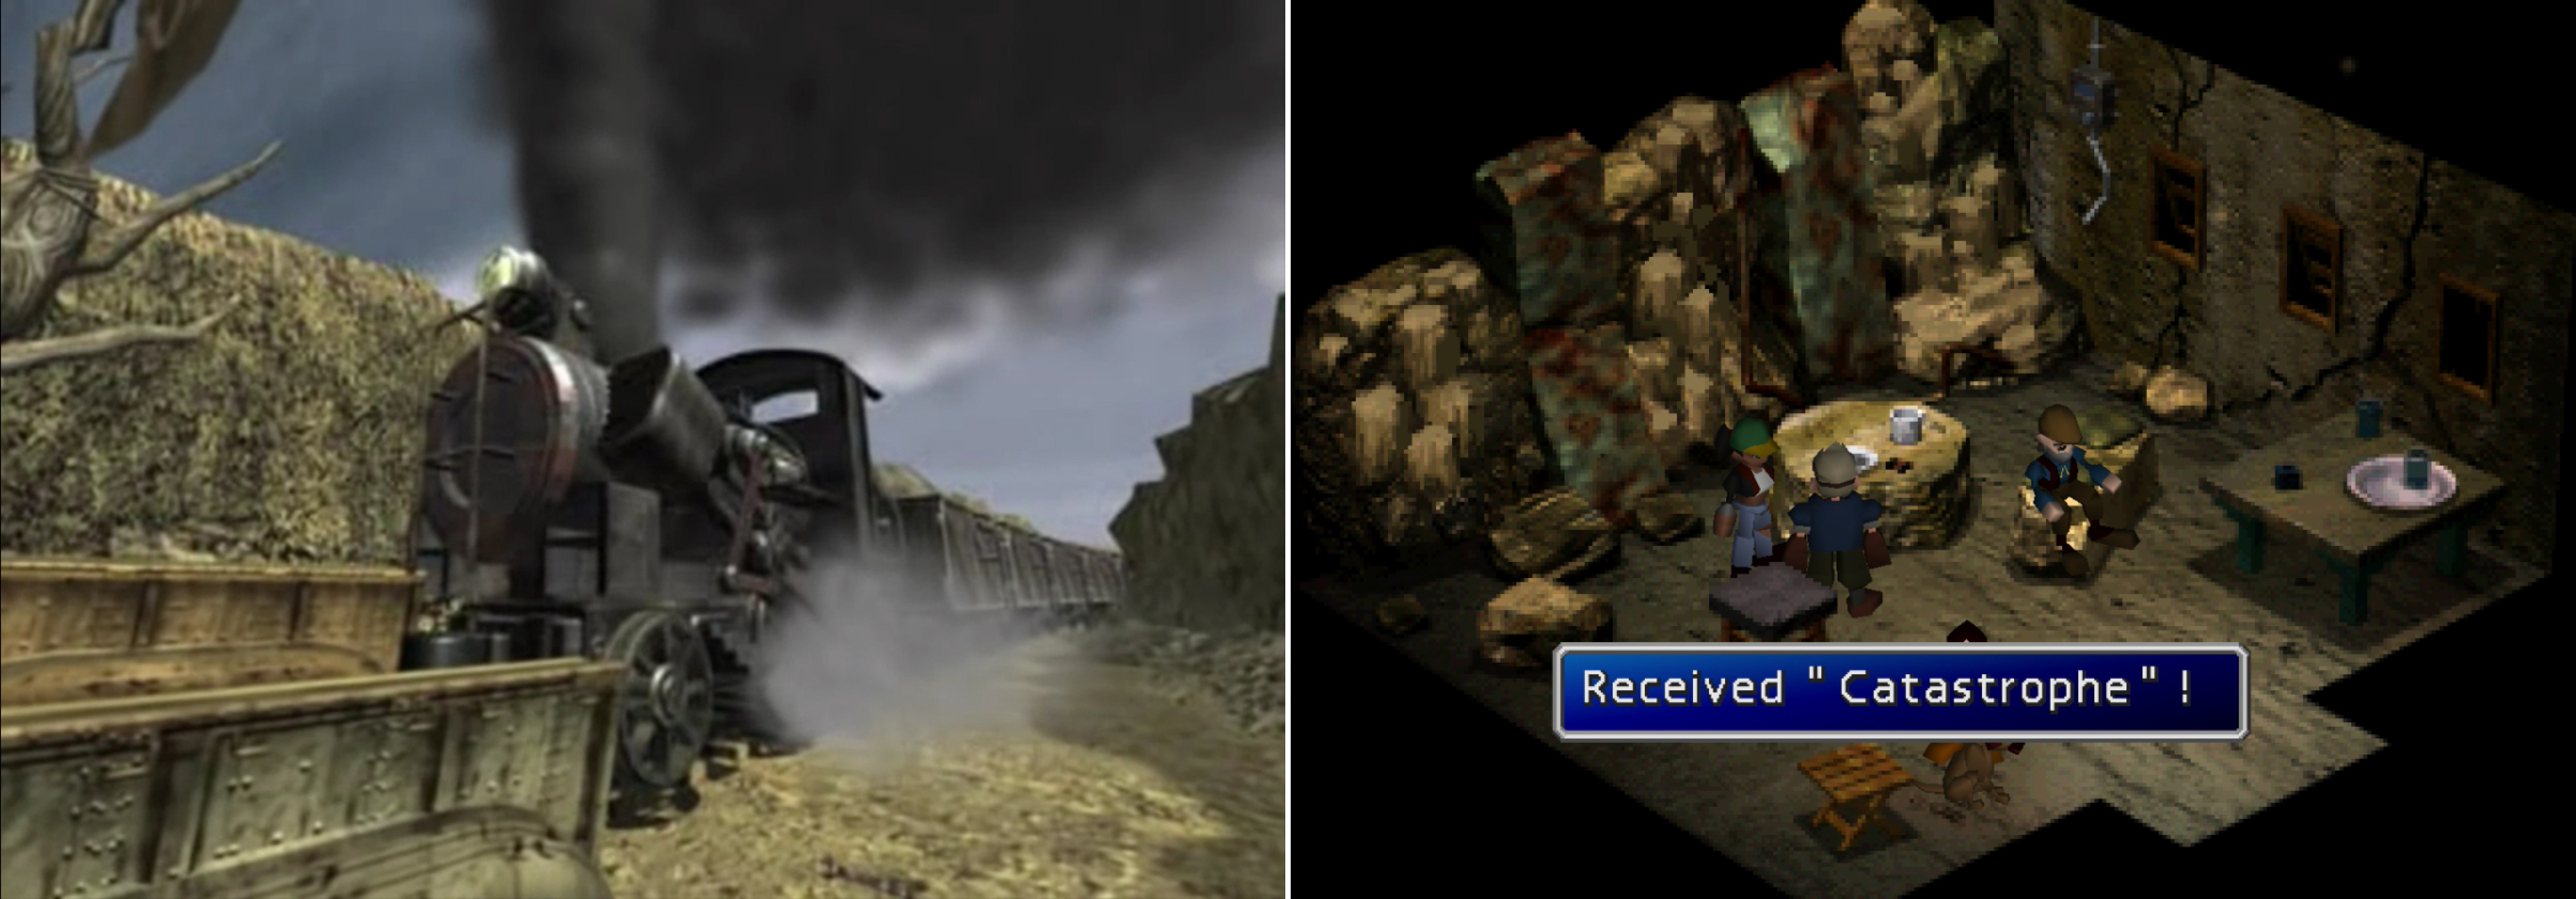 Defeat the Shinra guards and stop the train before it crashes into North Corel (left). For doing so you’ll be generously rewarded by the townsfolk (right).